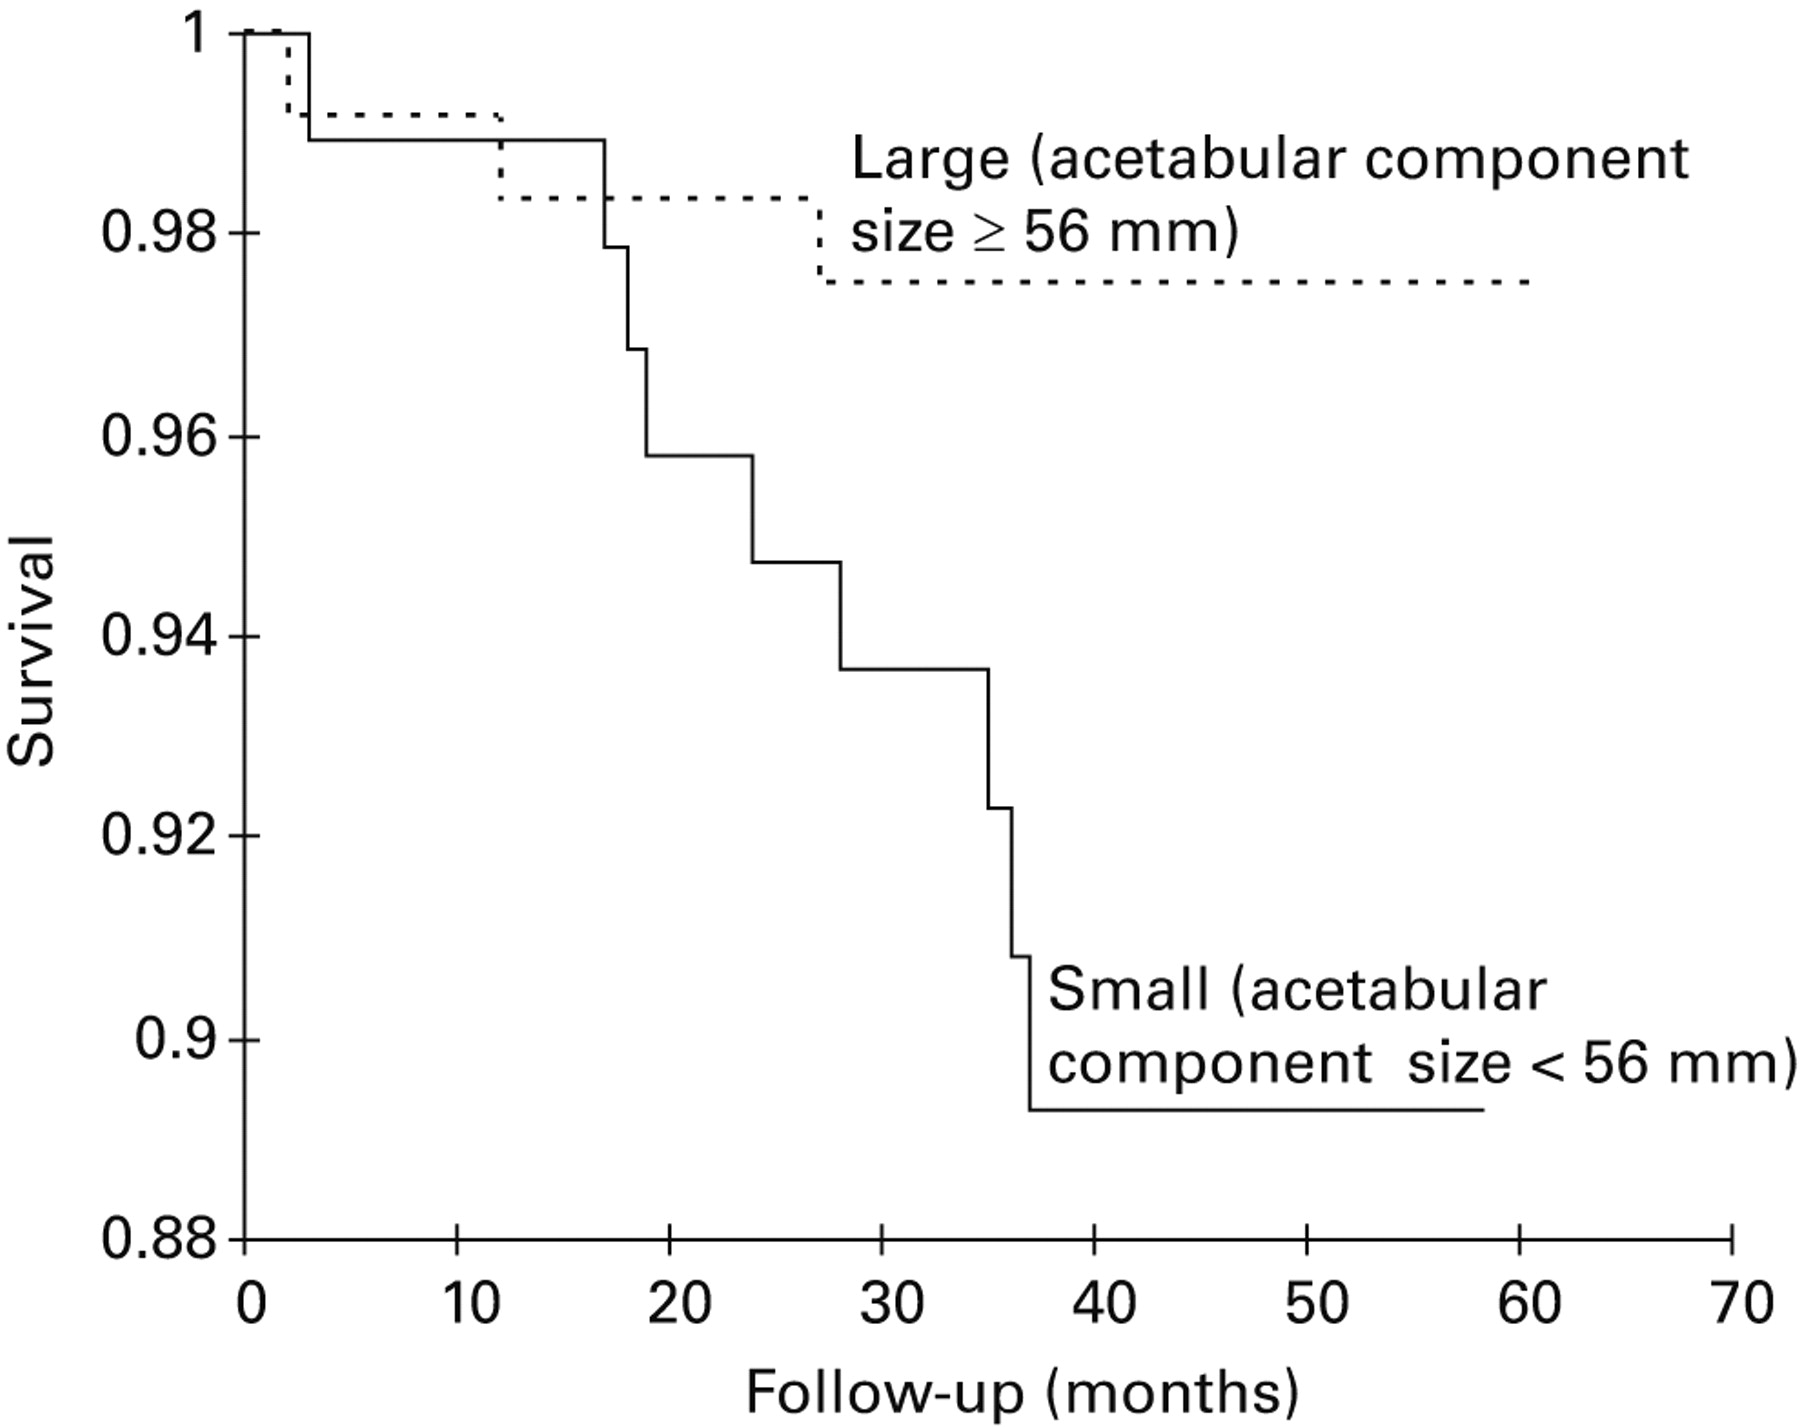 Fig. 4a, Fig. 4b  
            Kaplan-Meier survival curves for a) the entire series and b) separated by component size (large and small; dashed lines, 95% confidence interval, removed for clarity in b).
          